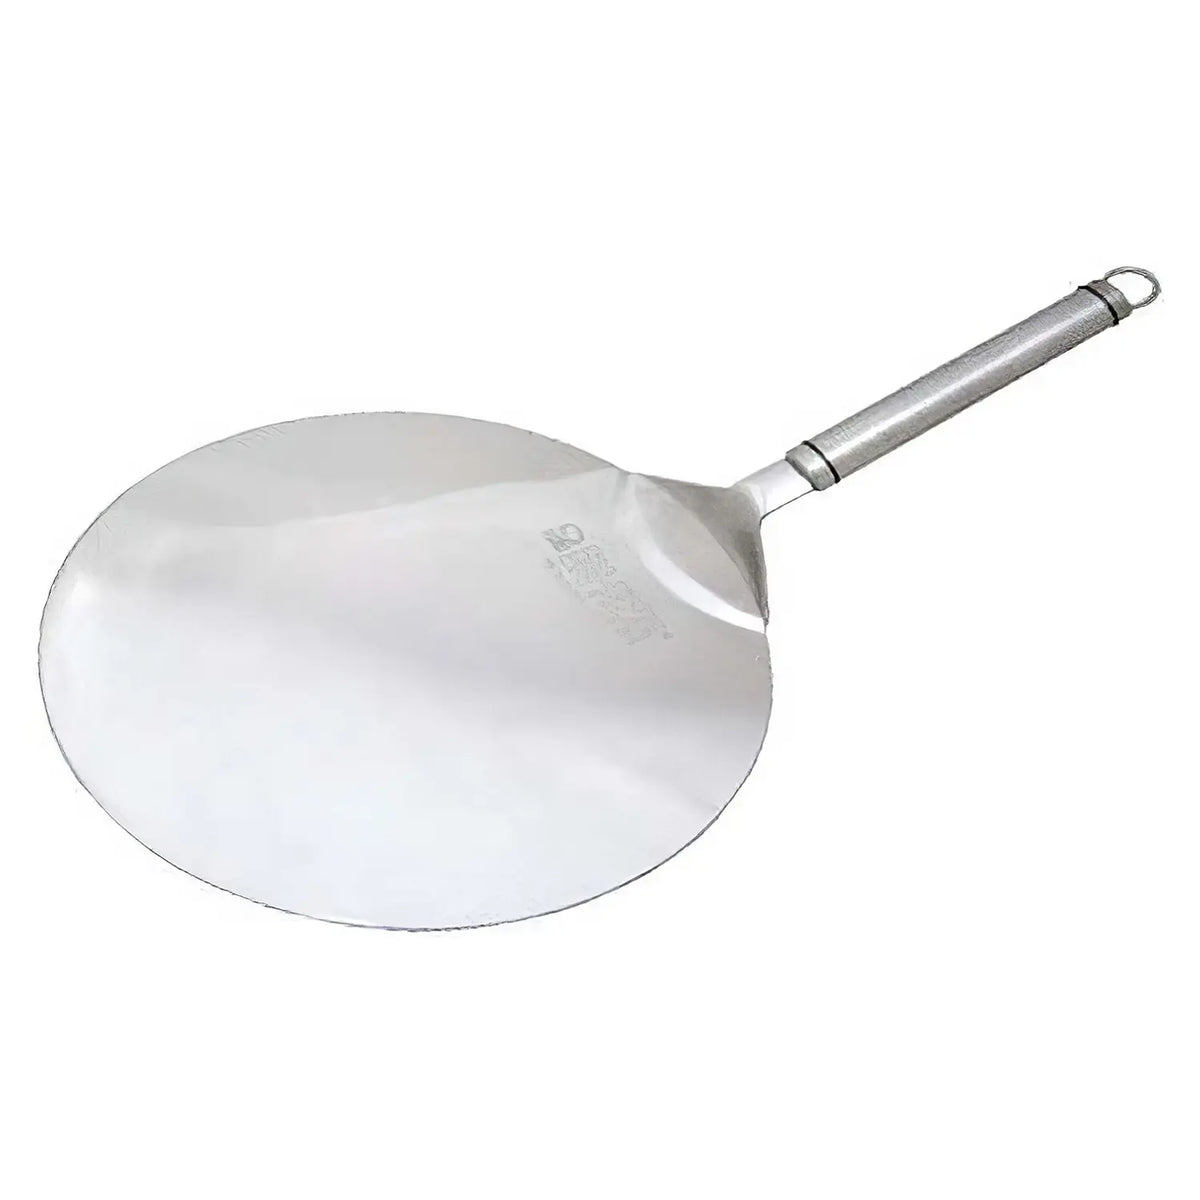 GS Home Products Stainless Steel Pizza Server